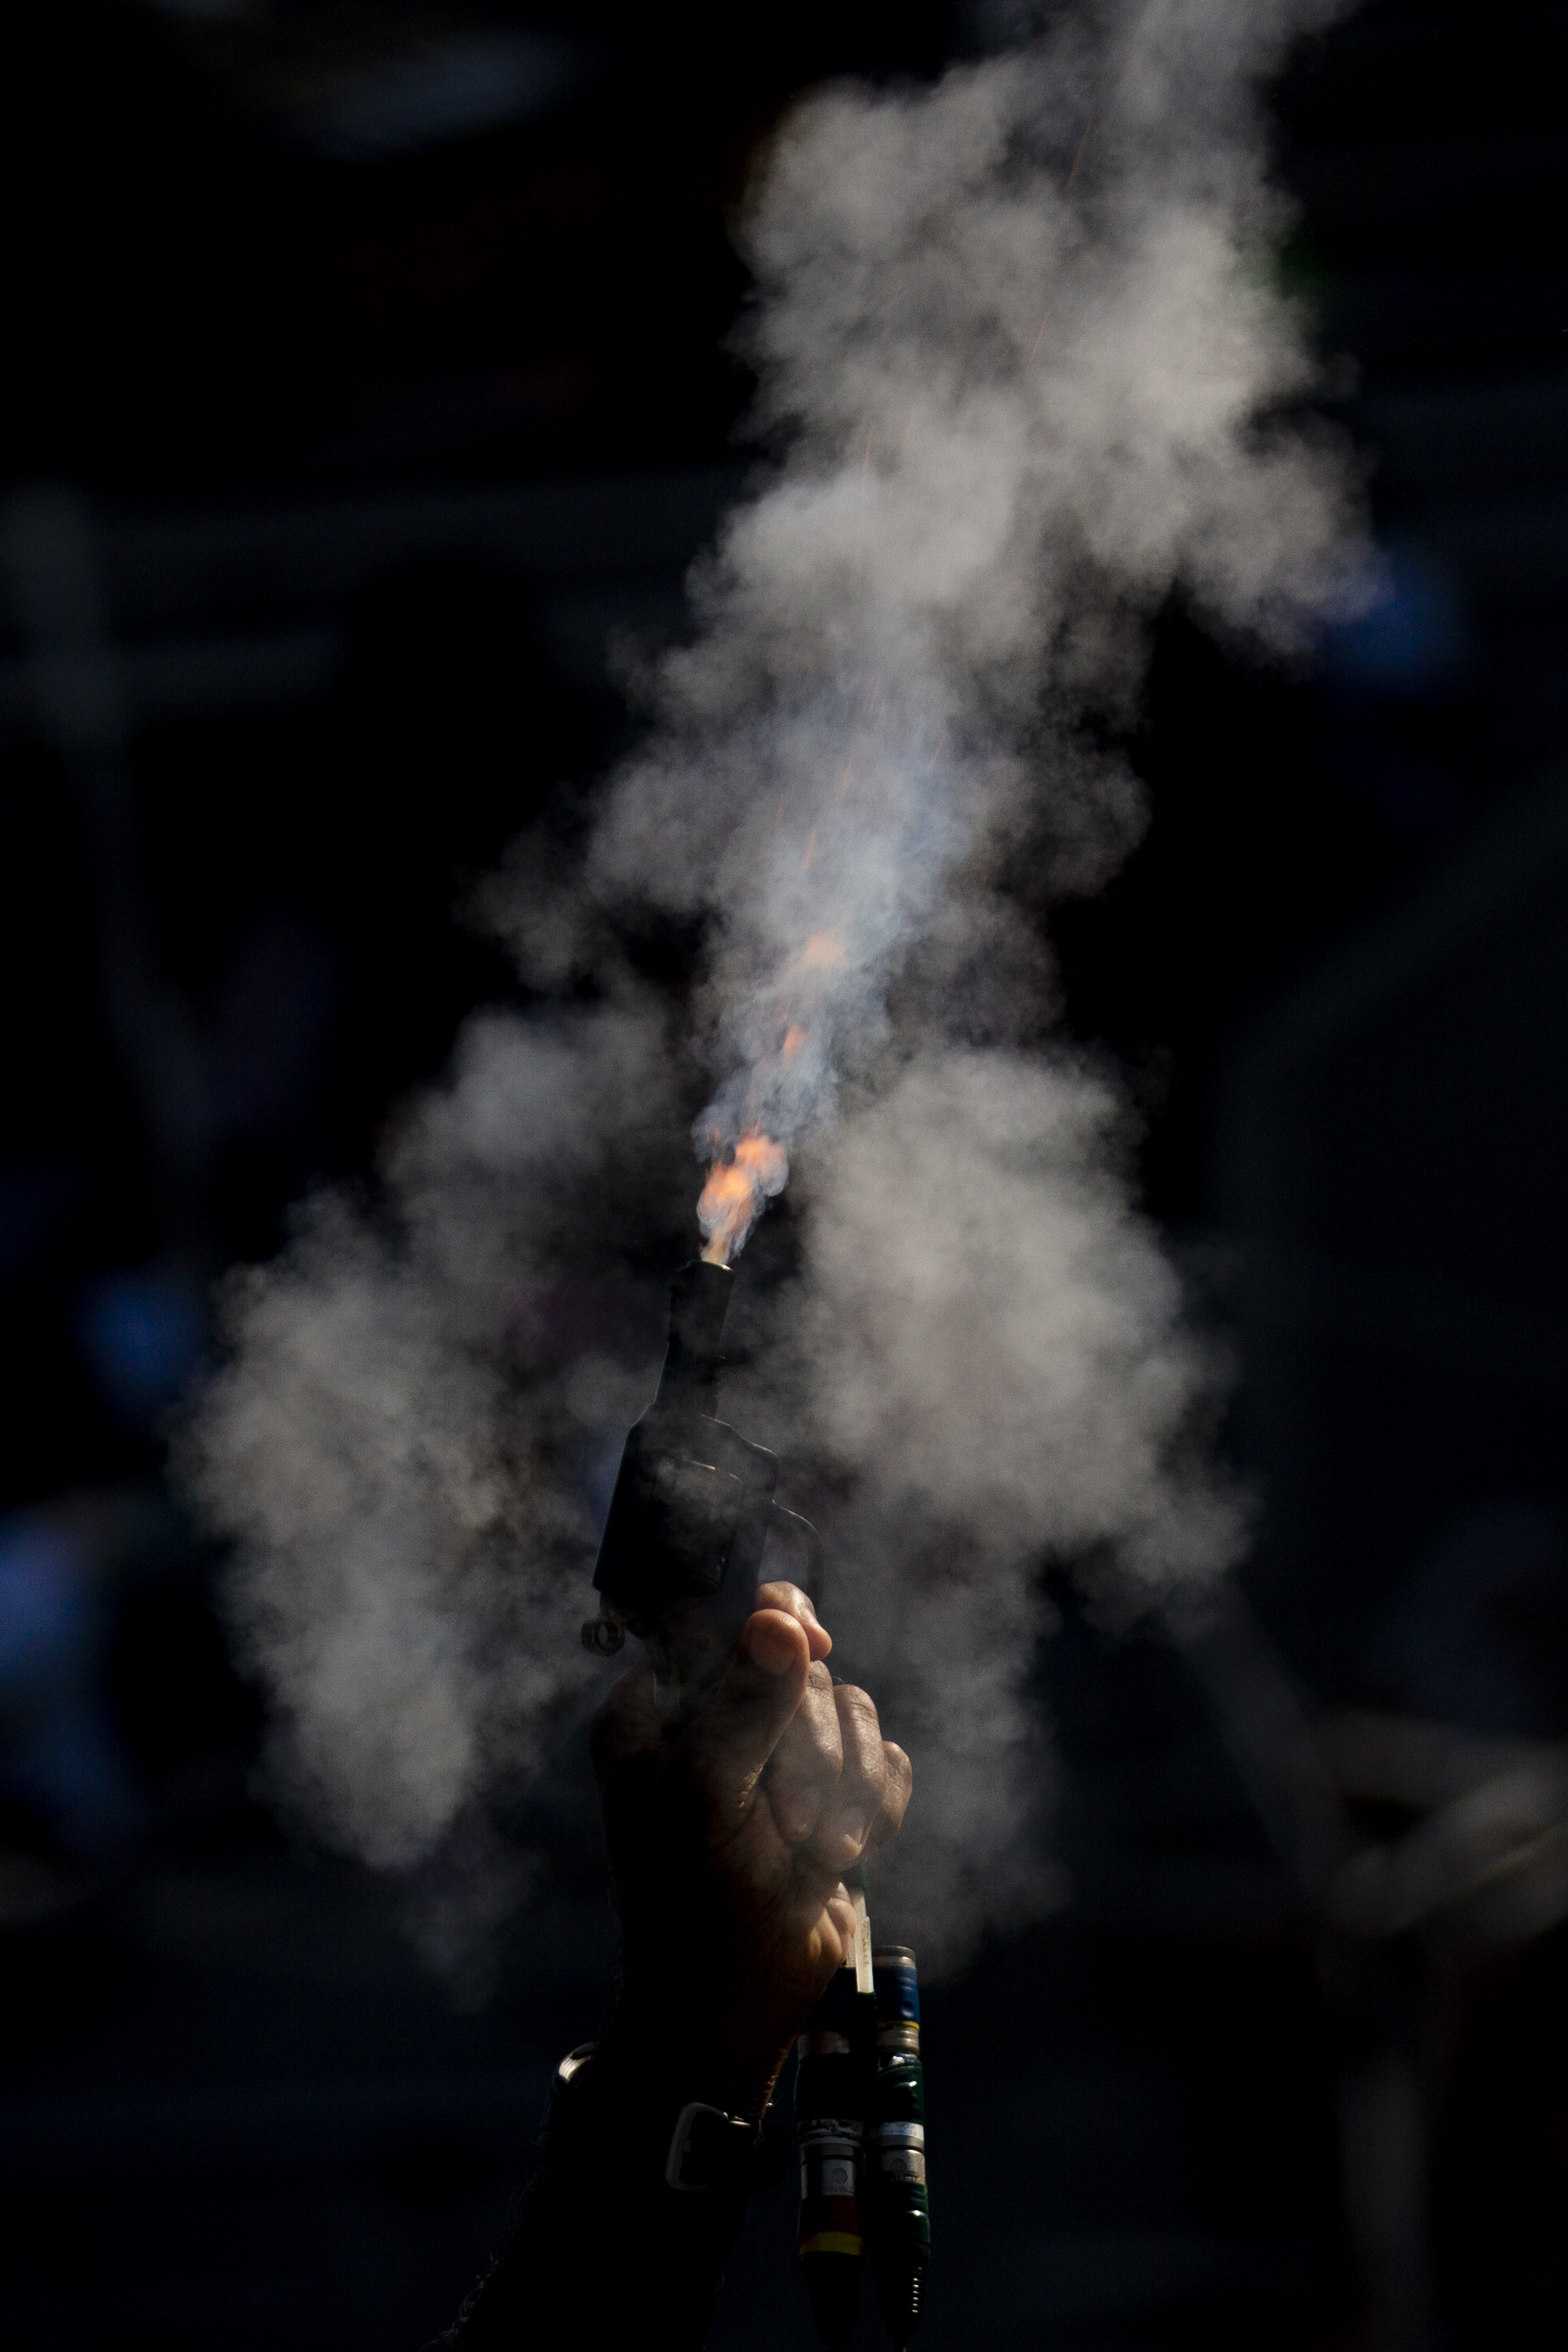  A starting gun is fired during the AAU Junior Olympic Games at Drake Stadium in Des Moines, Iowa August 2, 2018.  